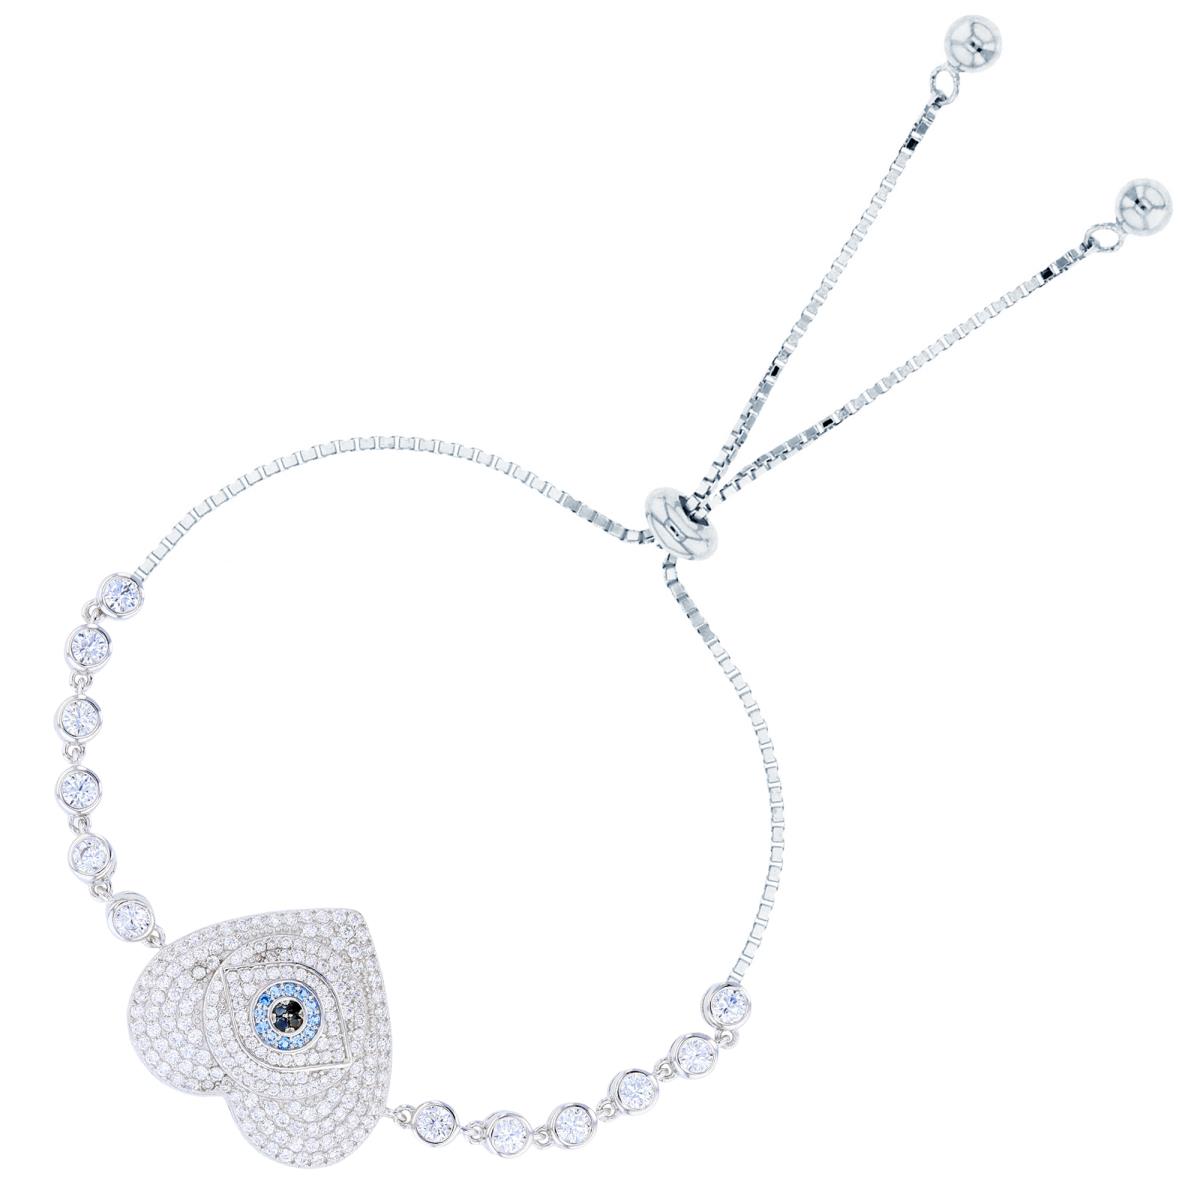 Sterling Silver Rhodium Rd White/ Black/ #119 Blue Spinel CZ Heart & Rd White CZ Bezel Circles on Sides Adjustable Chained Bolo Bracelet